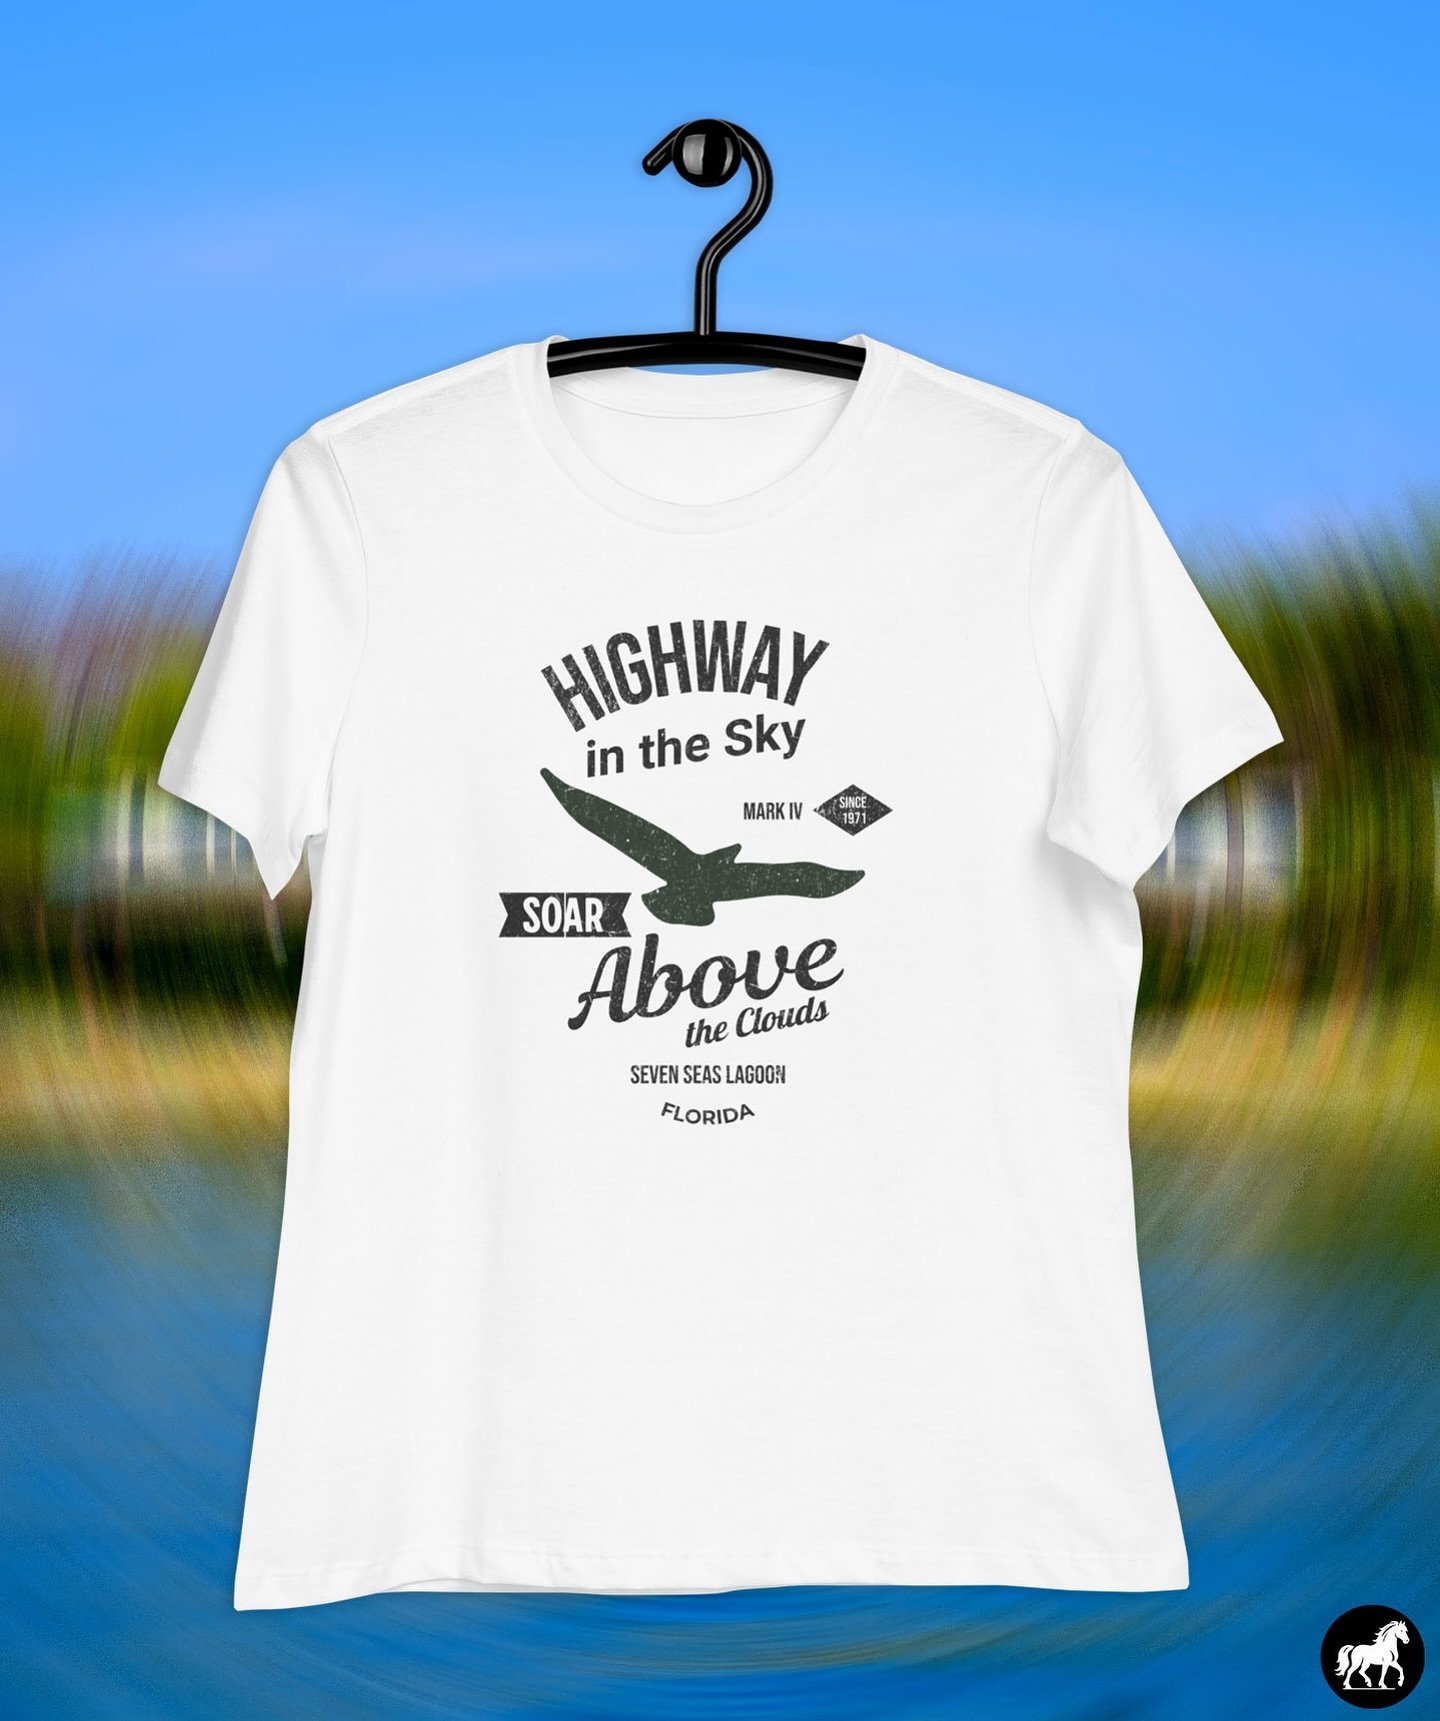 What&rsquo;s your favorite mode of WDW transportation?

Our Highway in the Sky design was inspired by the magic of gliding around the majesty of Seven Seas Lagoon.

Women&rsquo;s Relaxed T-Shirt
https://www.1923mainstreet.com/shop/p/highway-in-the-sk